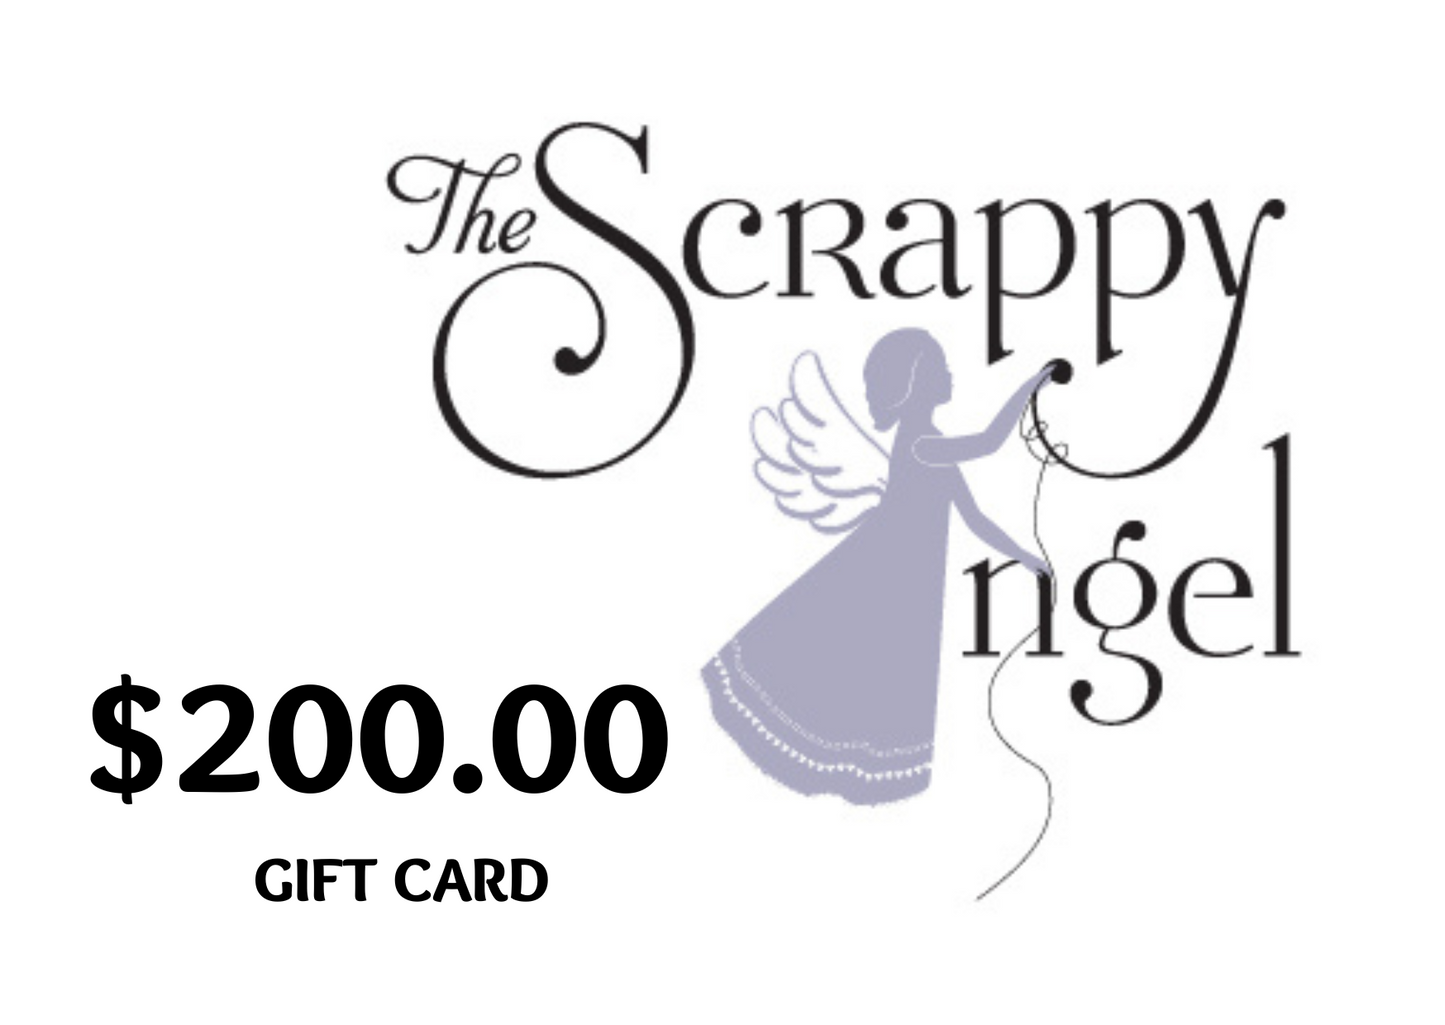 The Scrappy Angel Shop Gift Card